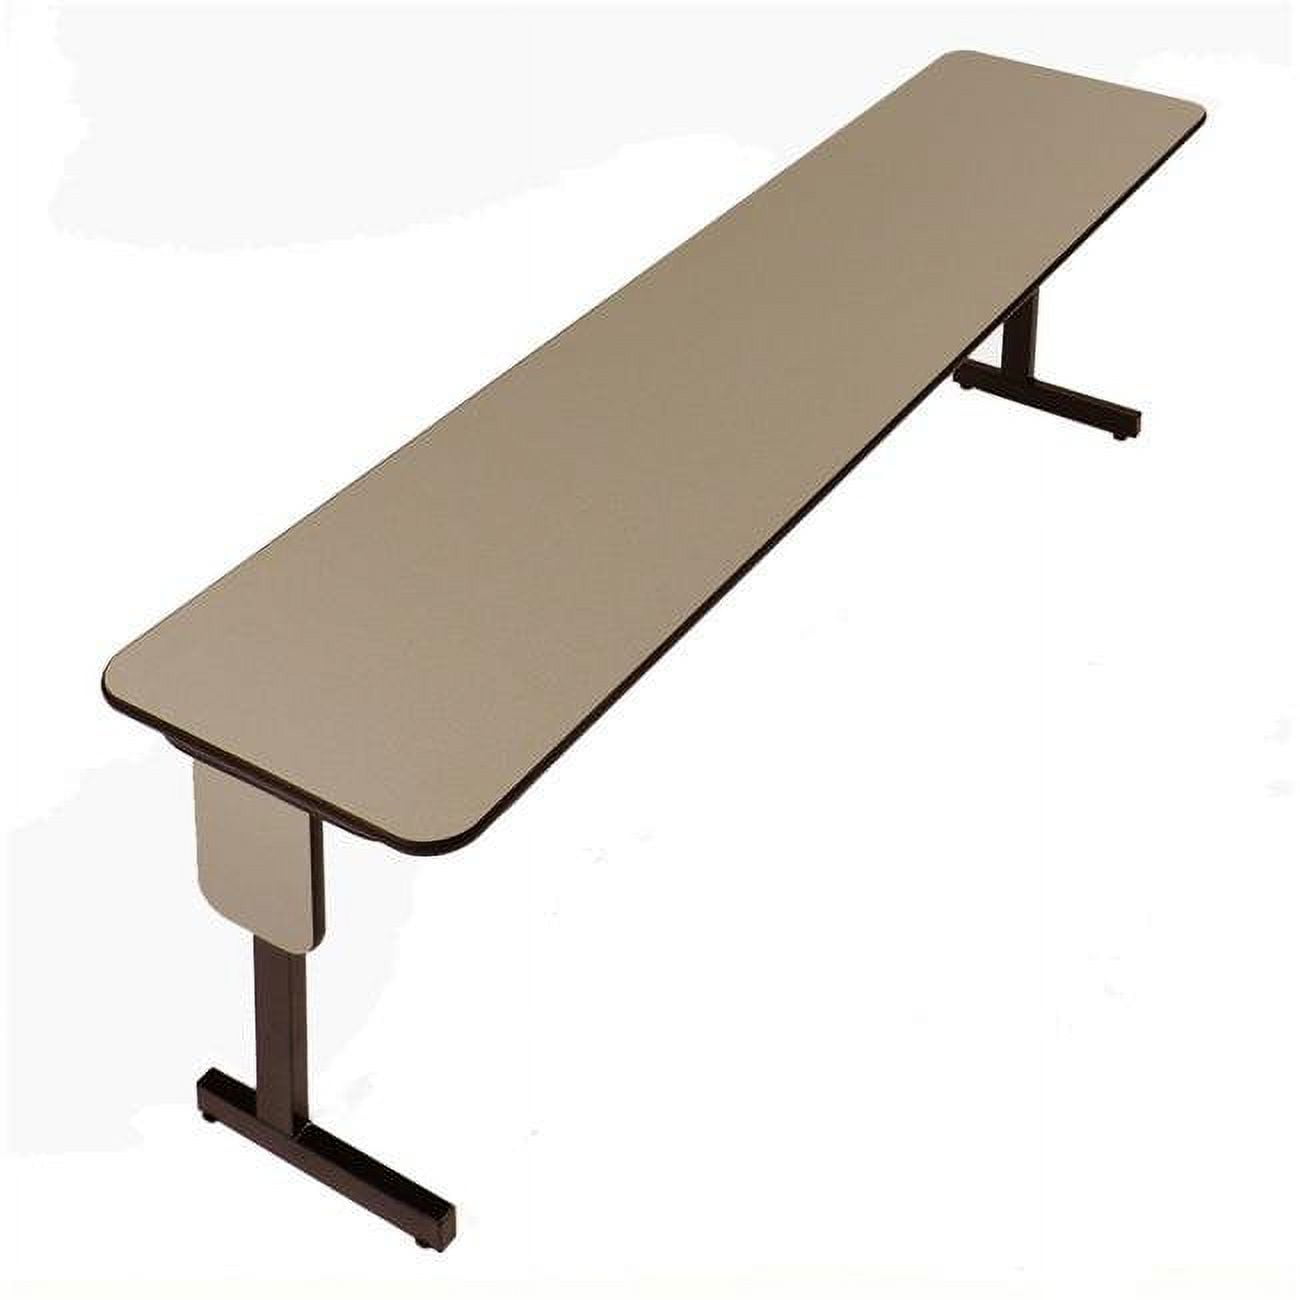 Spa2472px-54 Adjustable Height 0.75 In. High Pressure Rectangular Folding Seminar Table With Panel Leg, Savannah Sand - 24 X 72 In.